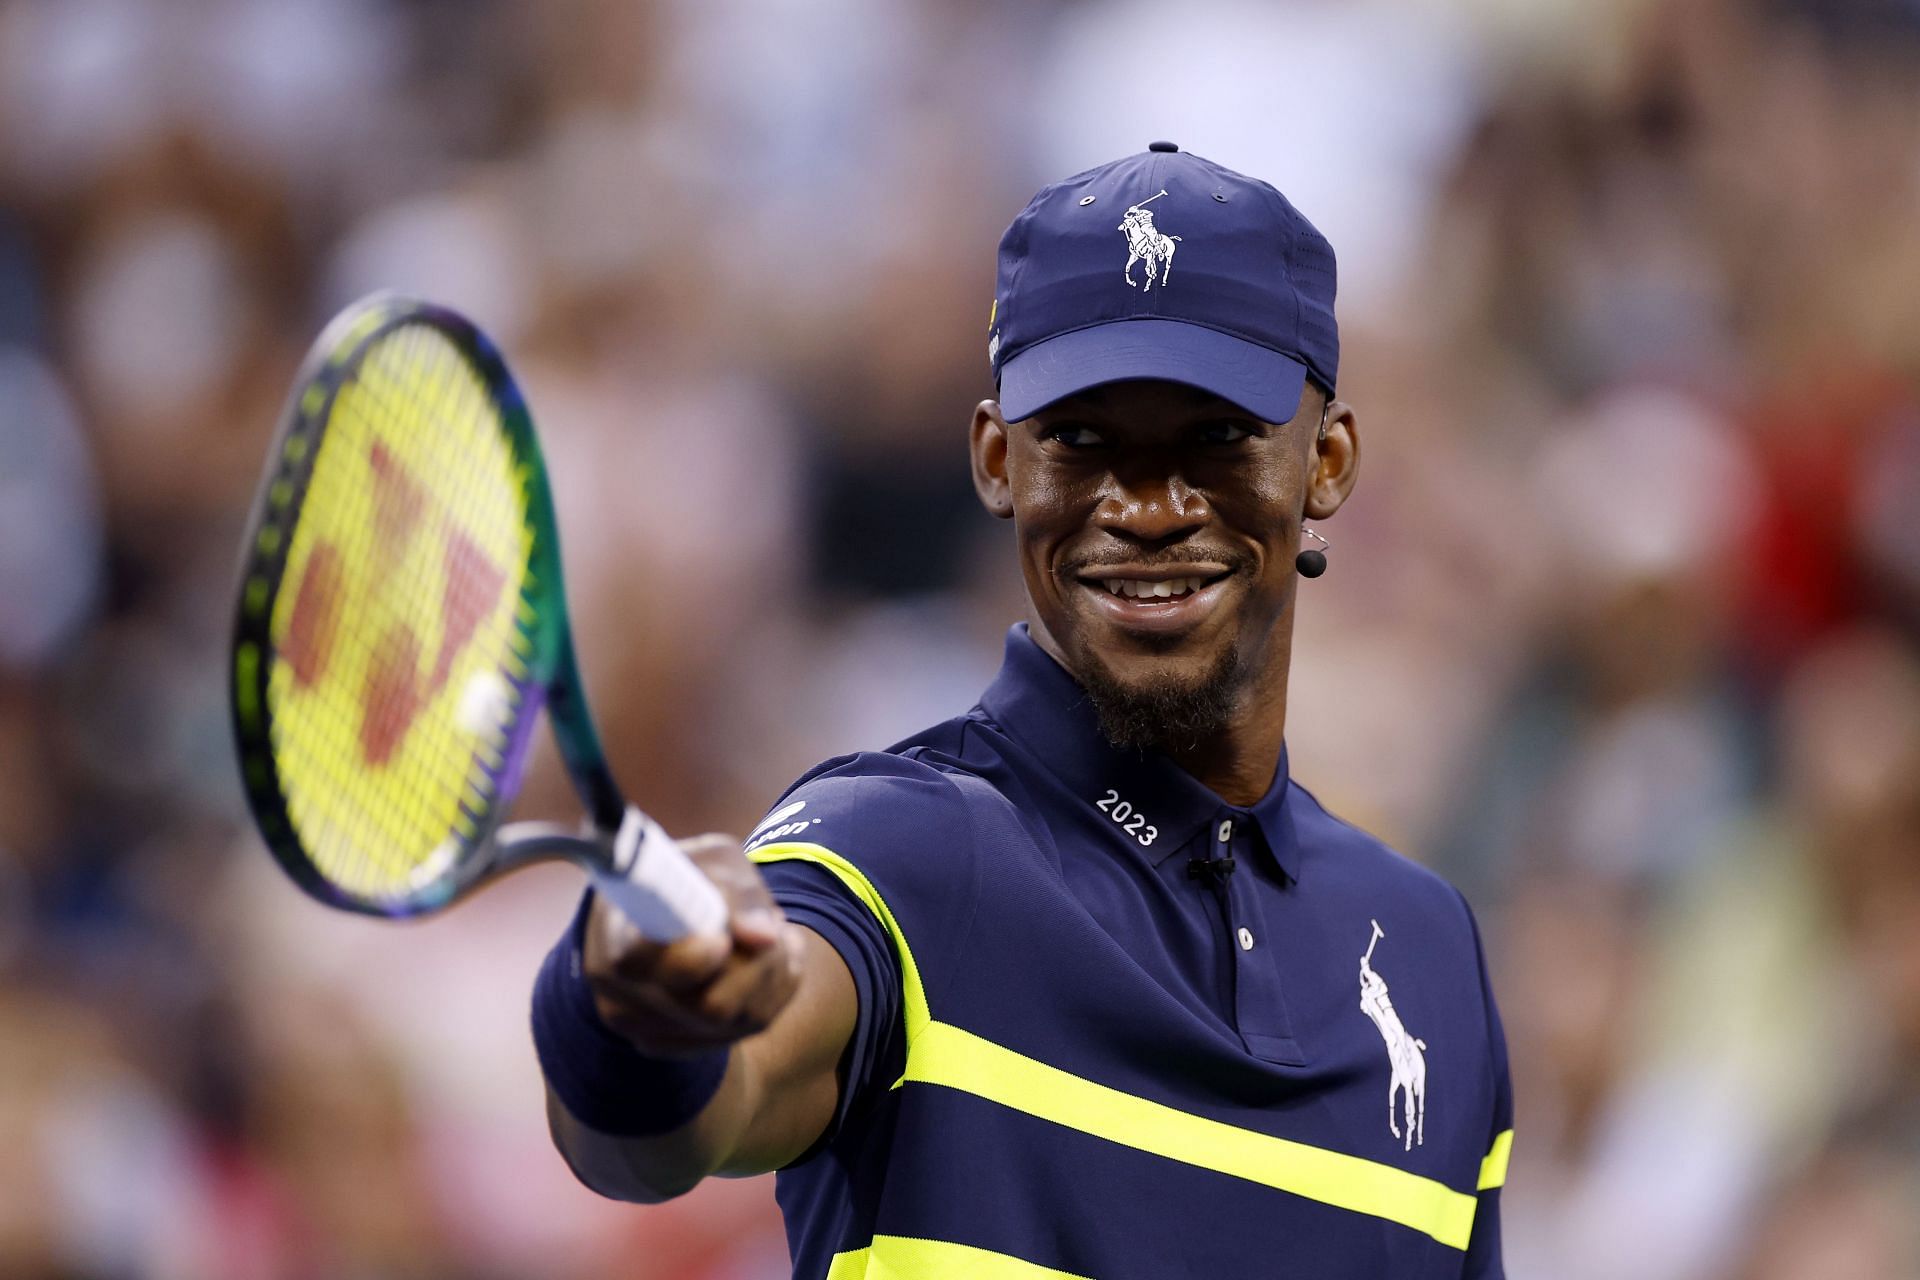 Jimmy Butler at the 2023 US Open - Stars of the Open Exhibition Match to Benefit Ukraine Relief